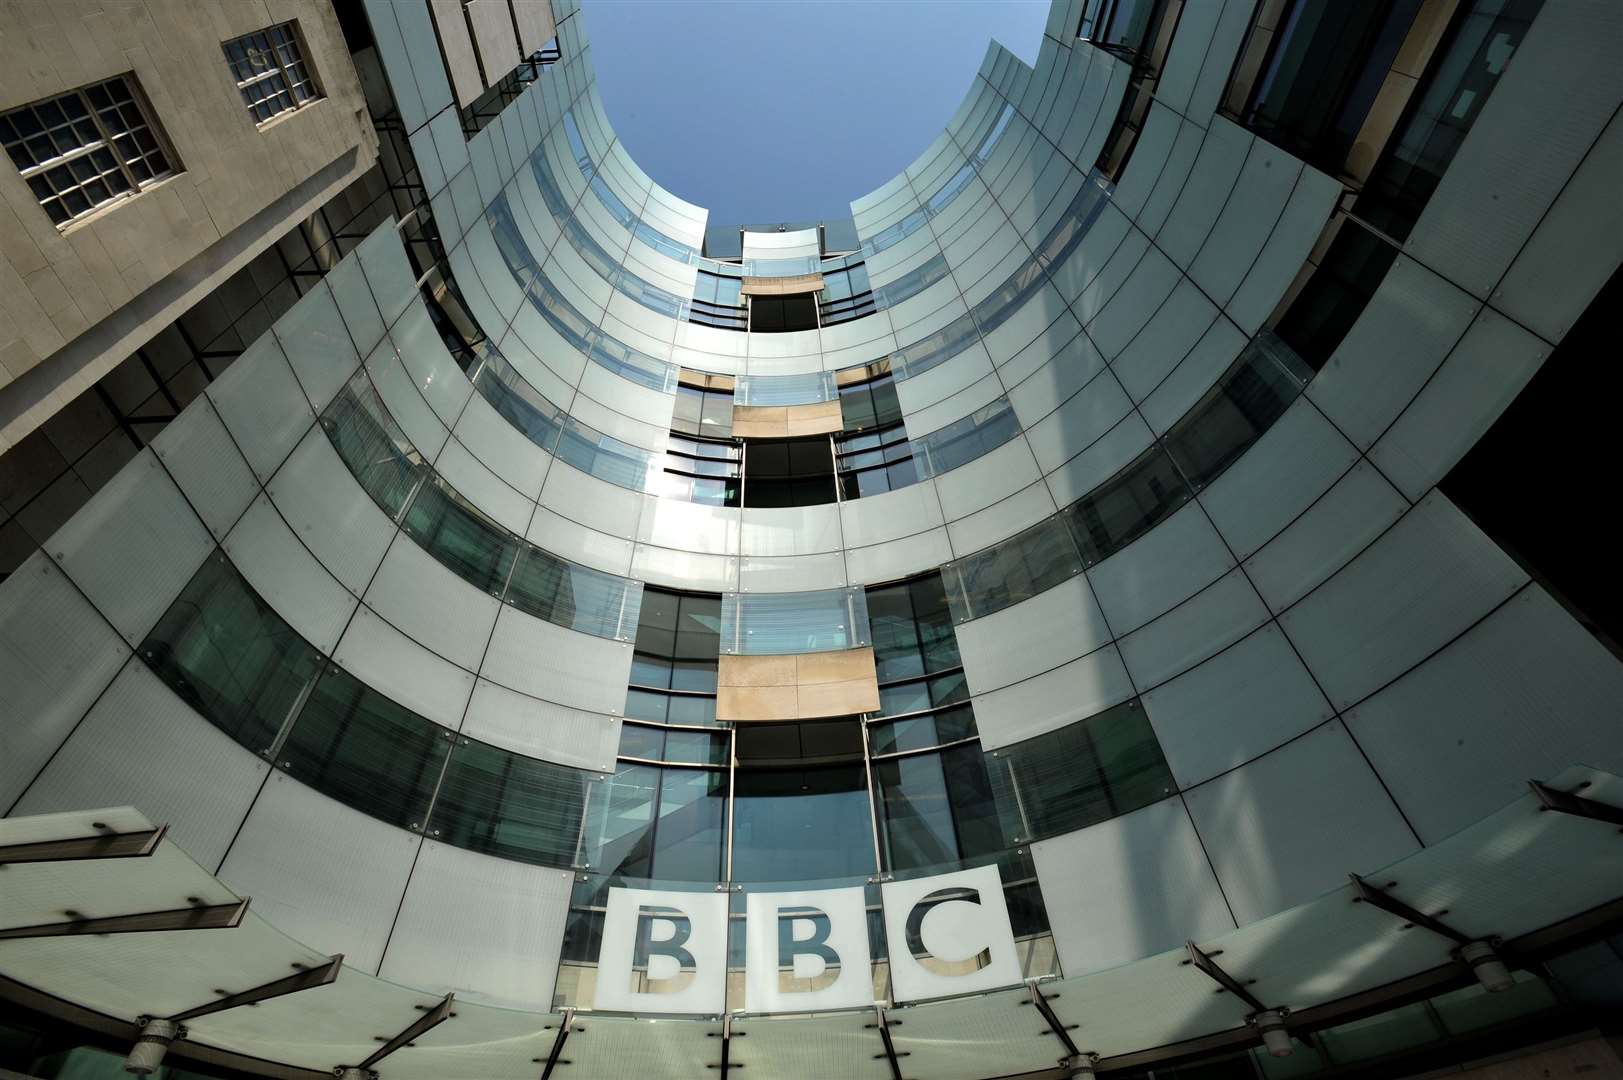 The BBC has updated its social media guidance (Nicholas.T.Ansell/PA)